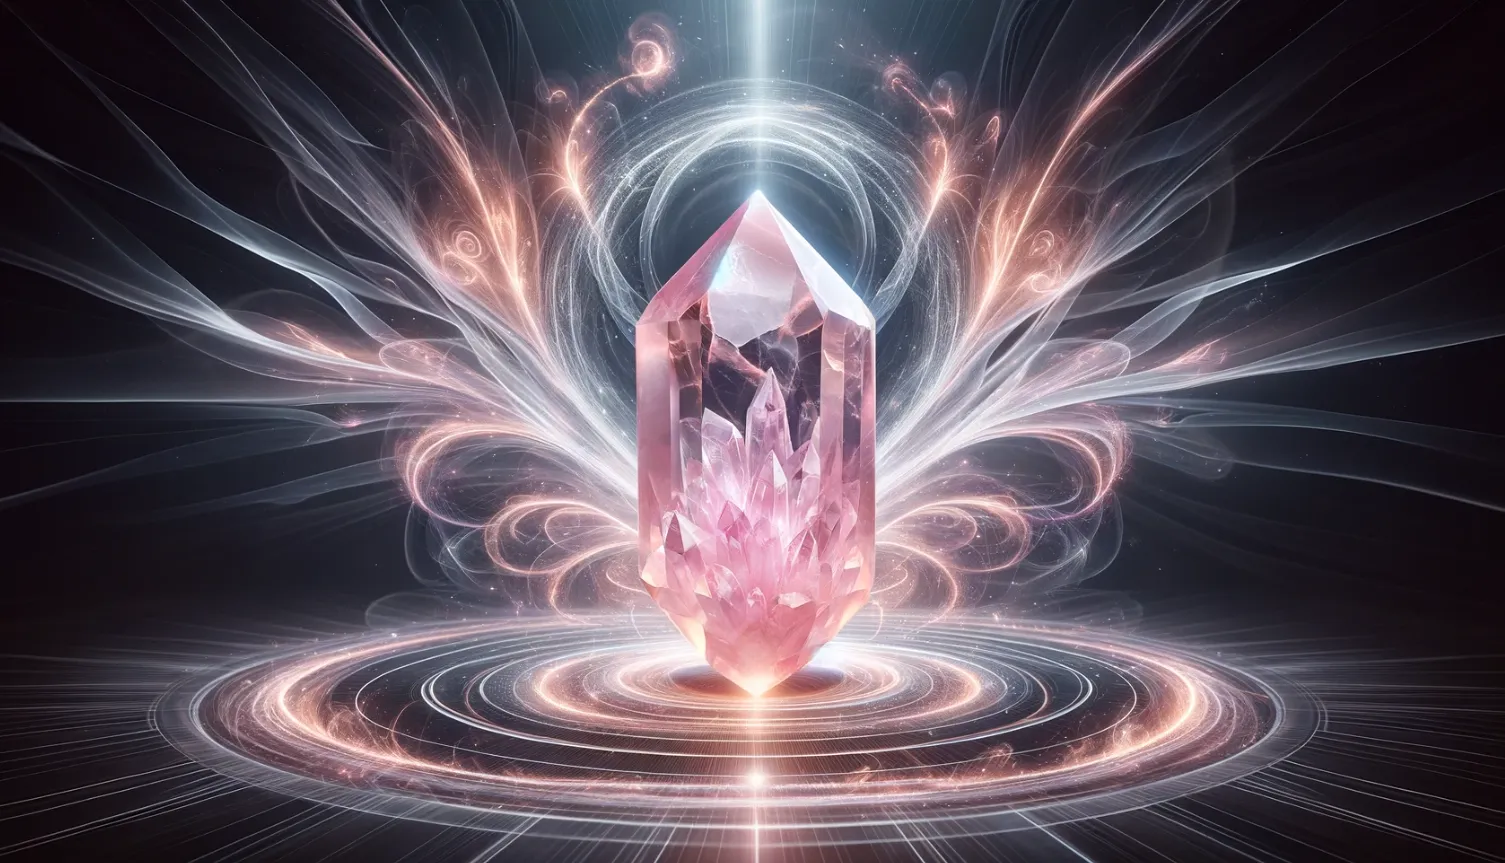 rose quartz graphic showing energy emitting from the crystal